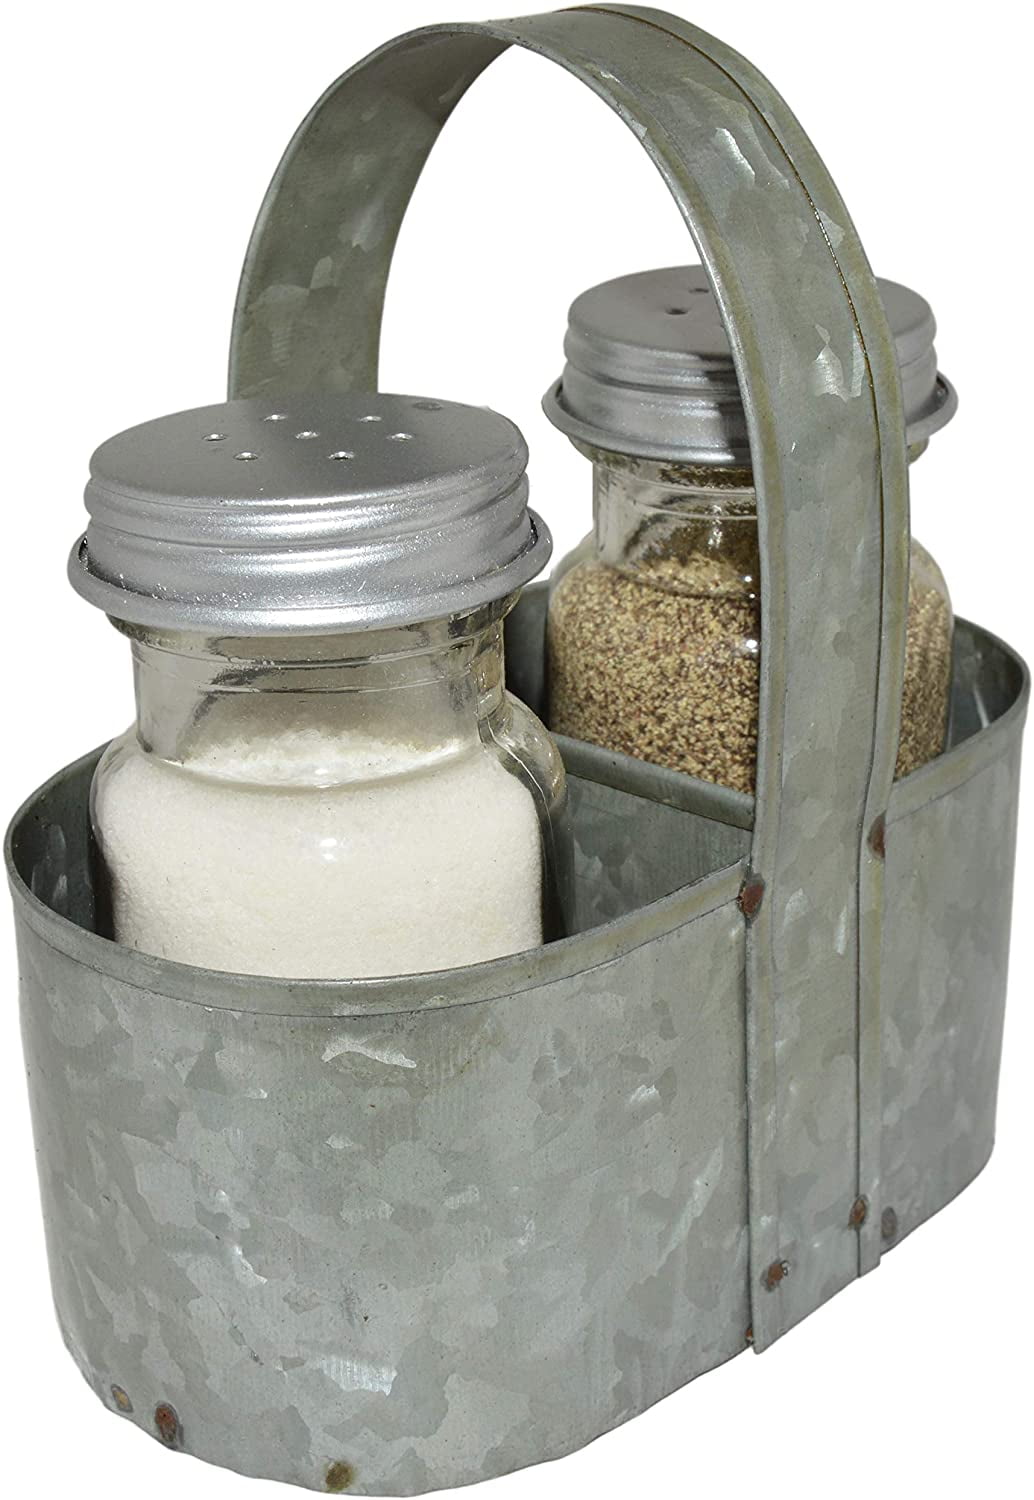 Rustic Salt and Pepper Mason Jar Double Can Caddy 